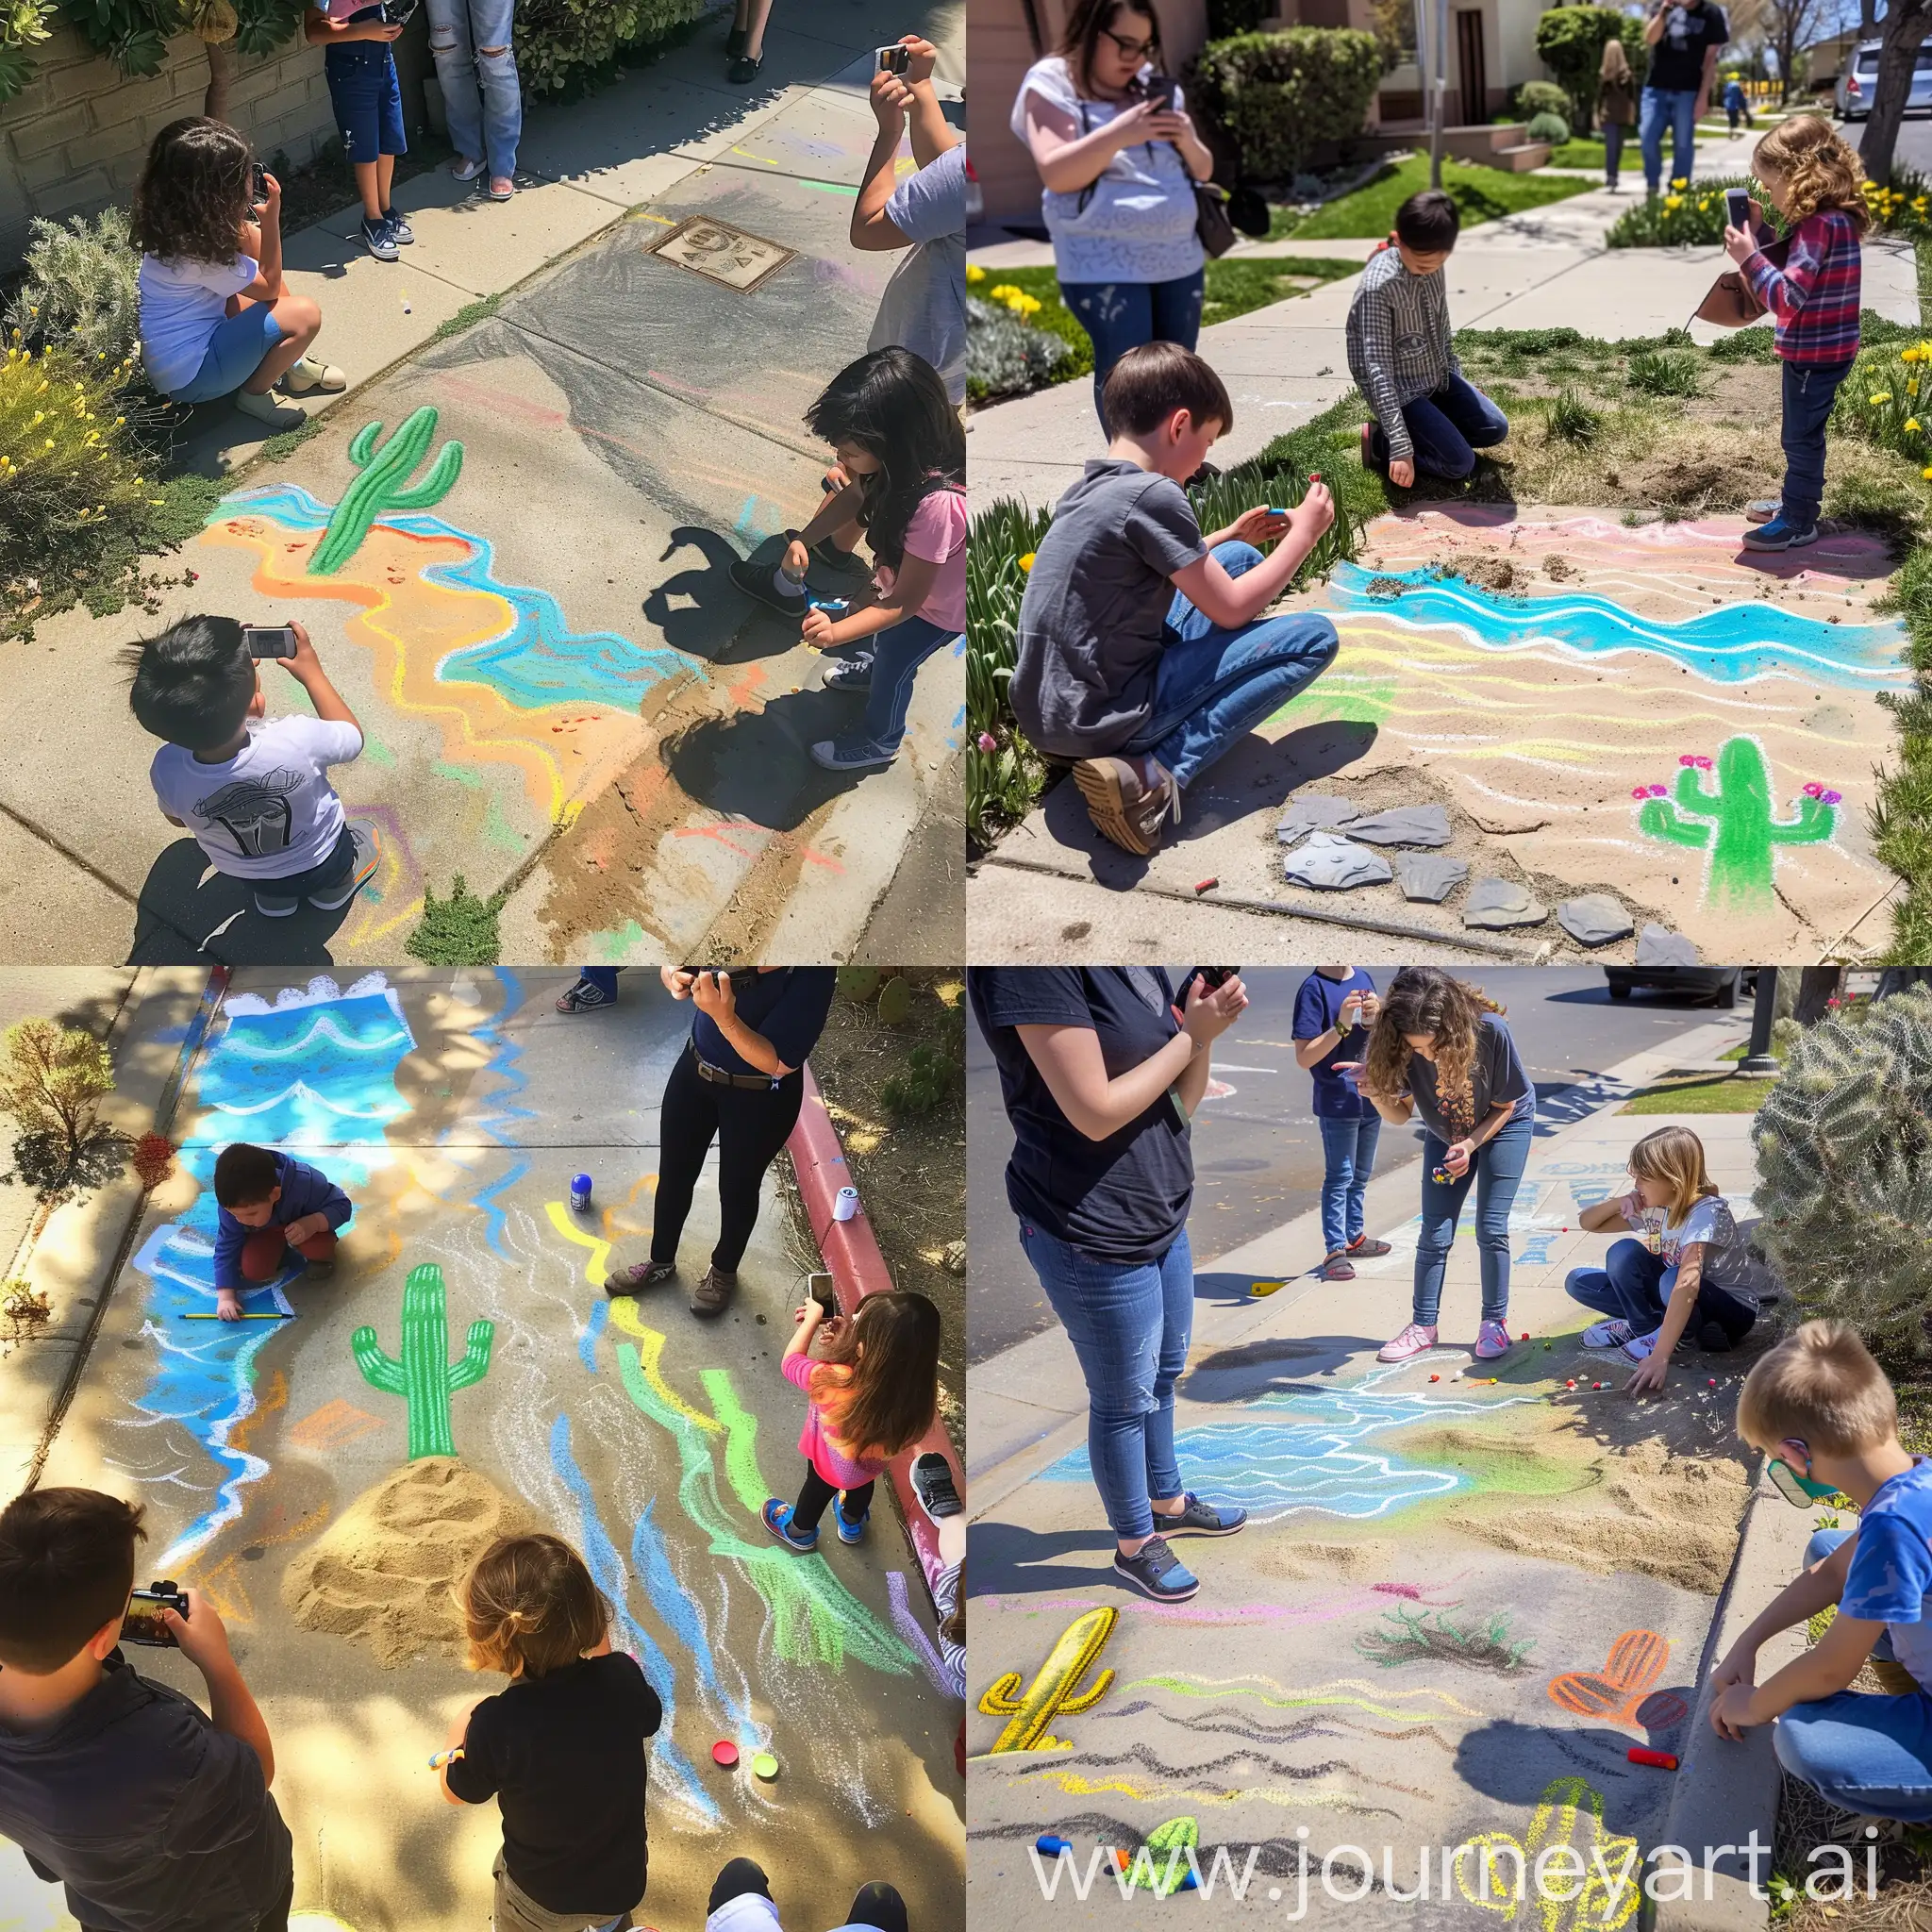 On a sunny spring morning, three kids use colored chalk to draw sand, waves, cacti on the sidewalk, and parents take photos of the kids and their creations!